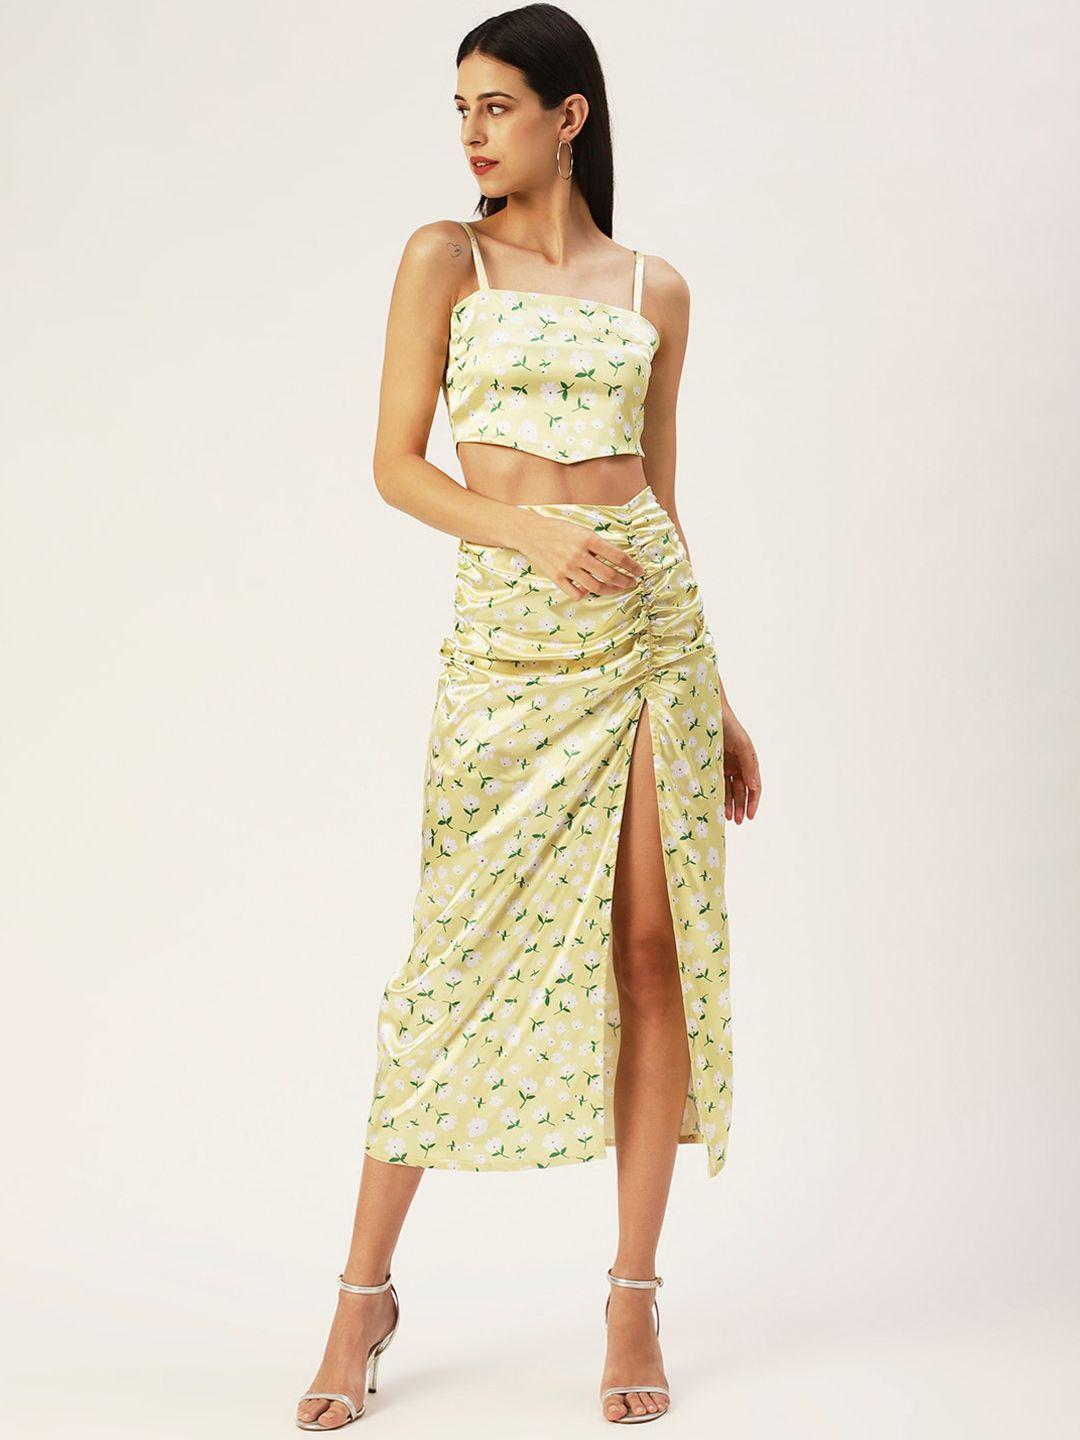 4wrd by dressberry women yellow printed co-ords set